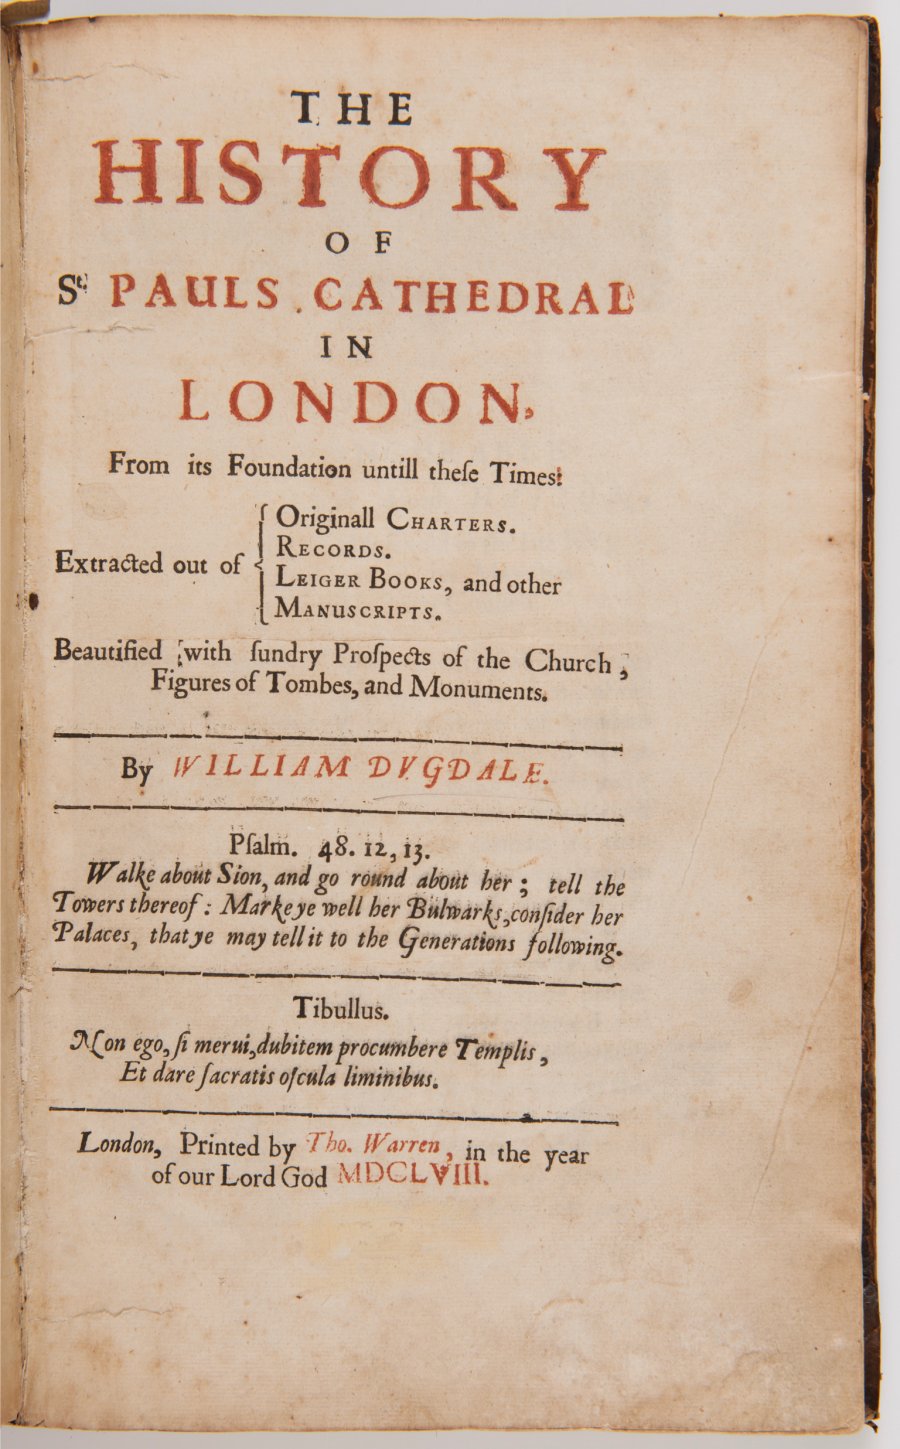 THE HISTORY OF ST. PAUL'S CATHEDRAL IN LONDON